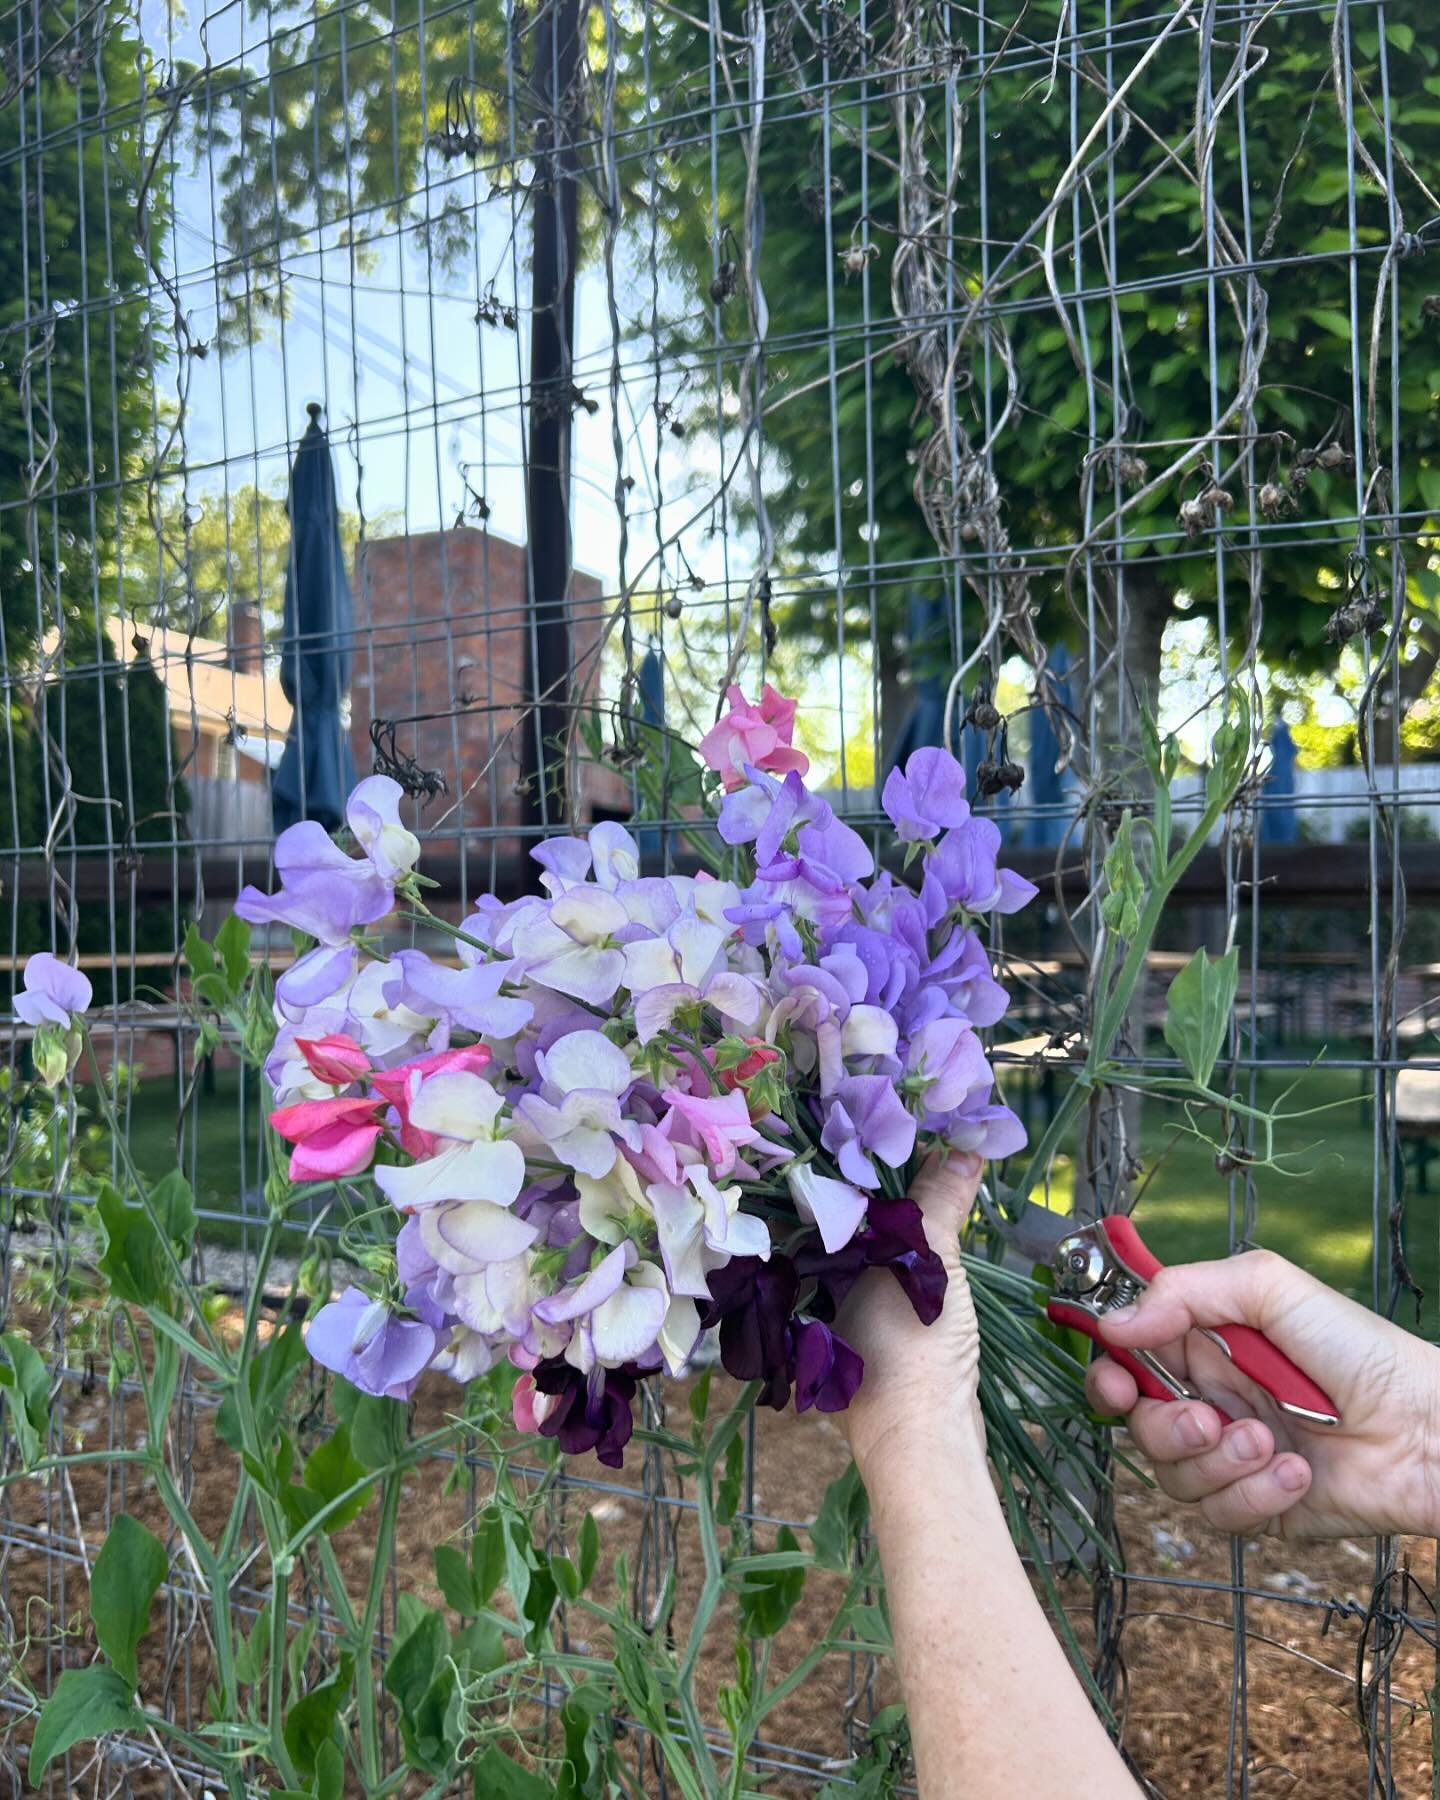 Sharing more farm beauty. Look for multi-colored sweet peas in our spring bouquets. They look and smell fabulous! 💐

#farmflowers #weeklyfarmstand #digwhereyoulive